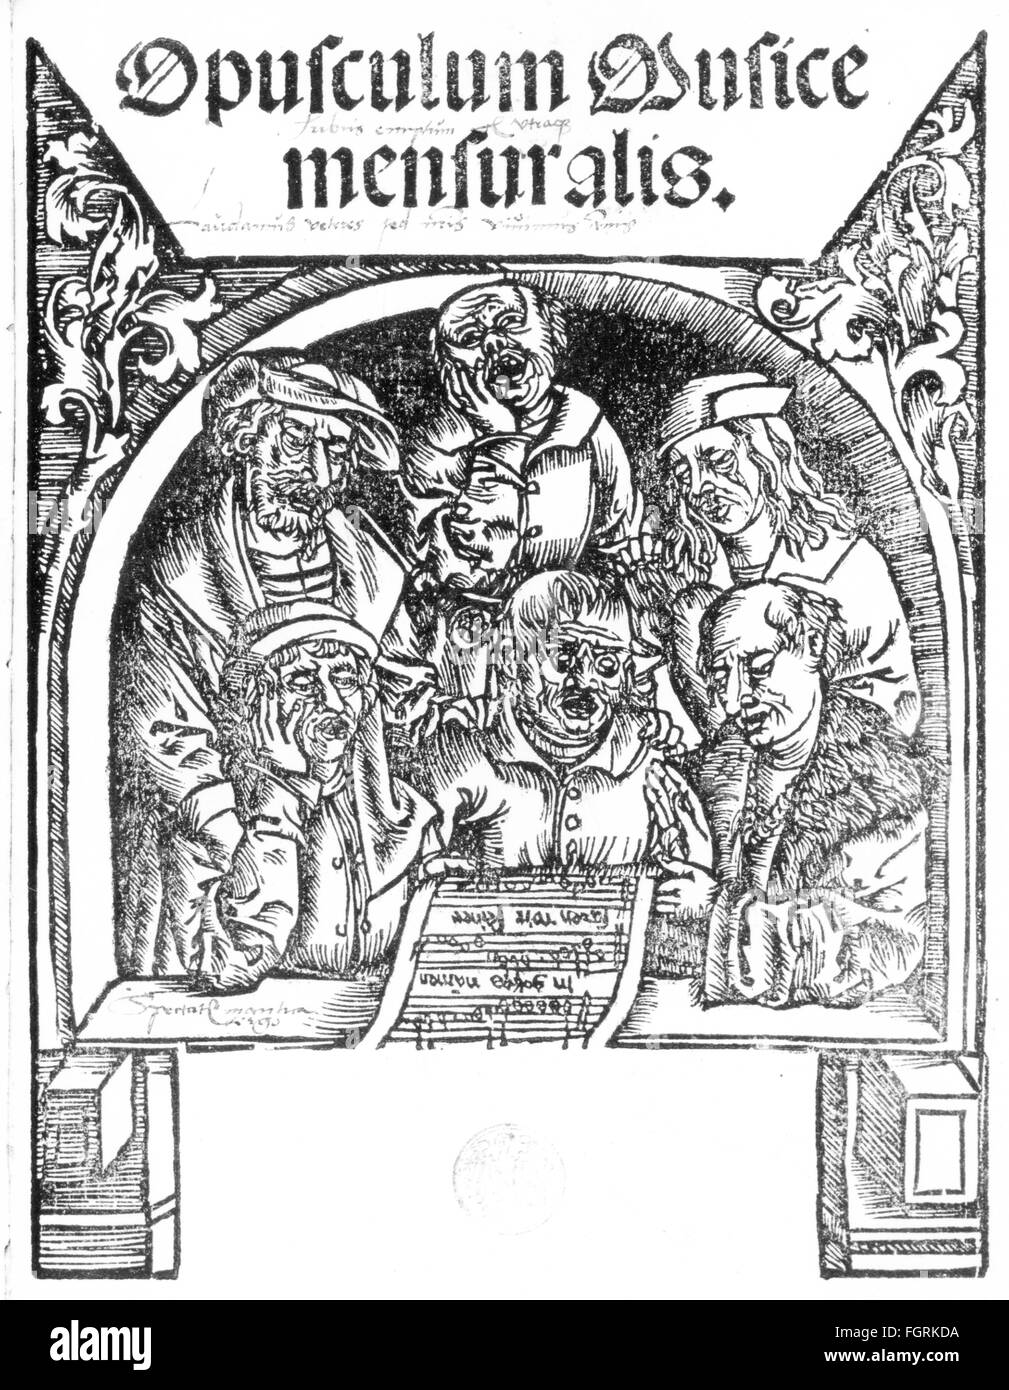 music, vocal music, choir, singing men, woodcut, 'Opusculum musice mensuralis' by Sebastian of Felsztyn, Krakow, 1517, Additional-Rights-Clearences-Not Available Stock Photo